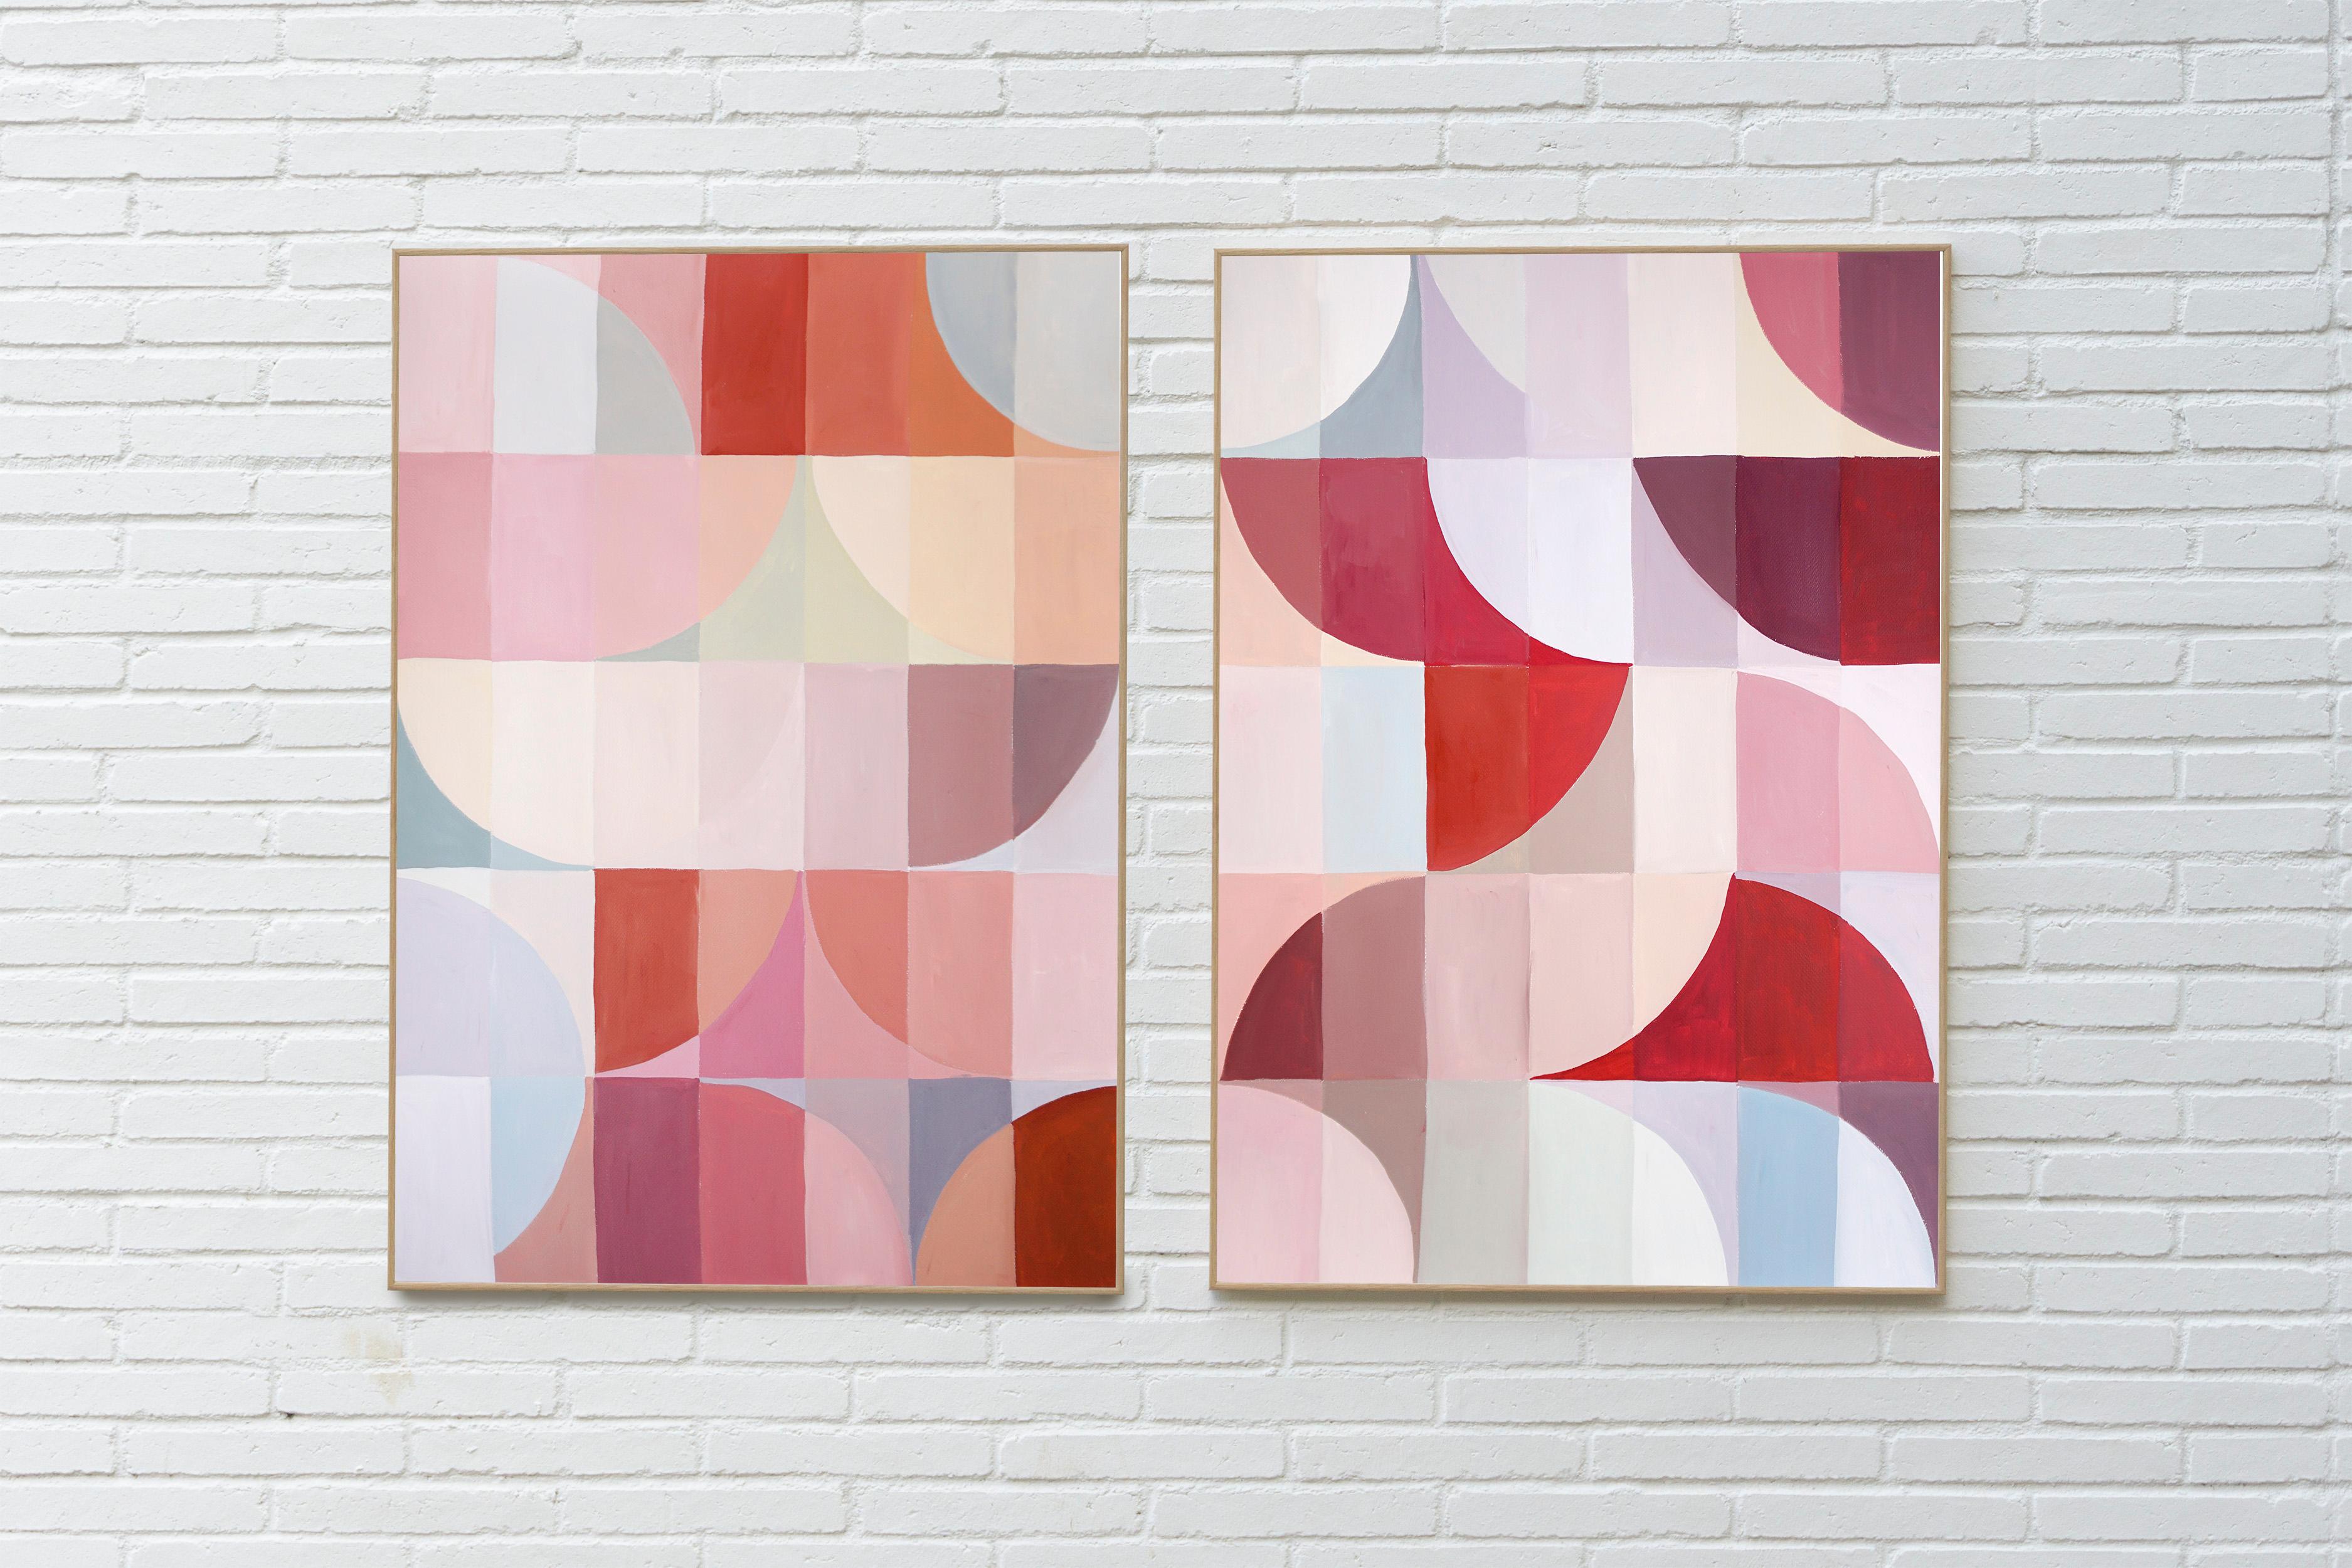 Traces of Rubies, Bauhaus Pattern Diptych, Red and Brown, Autumn Tones Pattern  - Painting by Natalia Roman